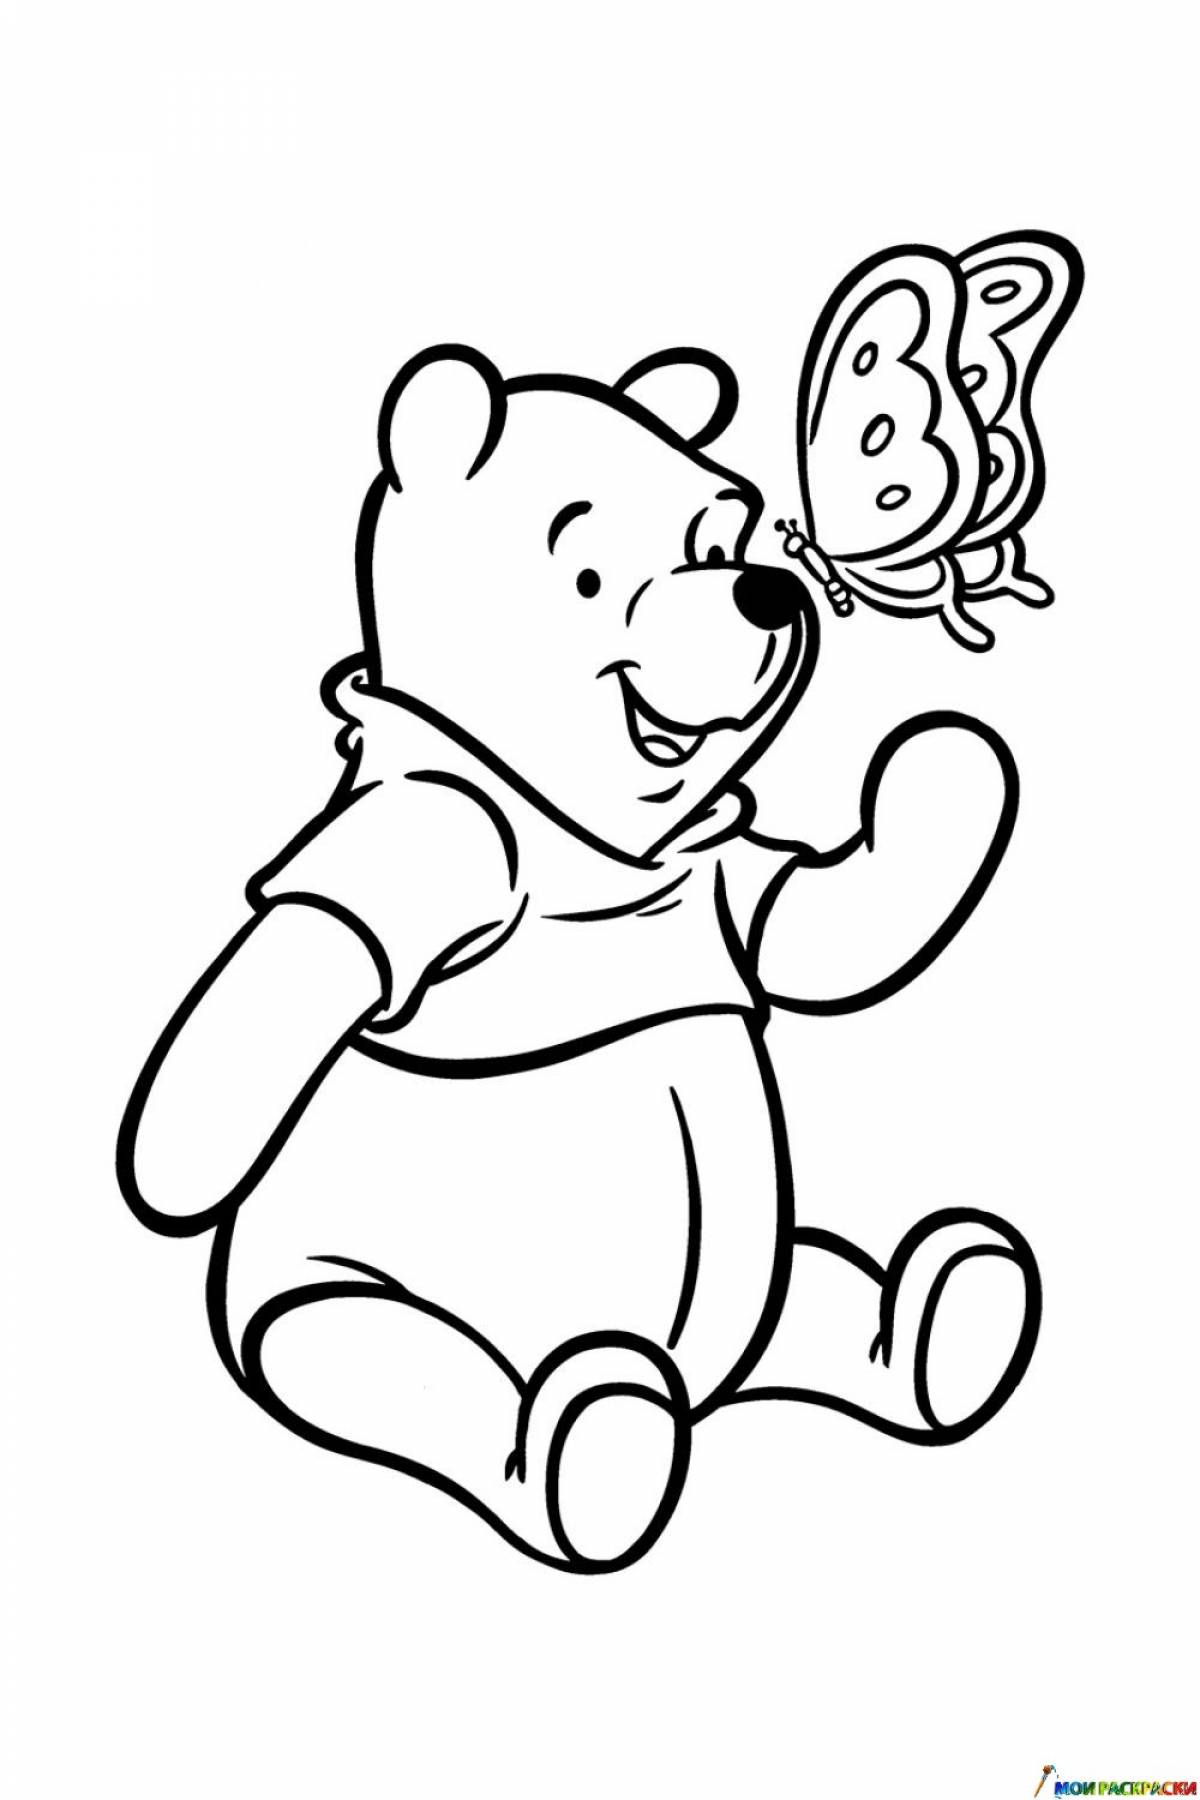 Winnie's adorable coloring book